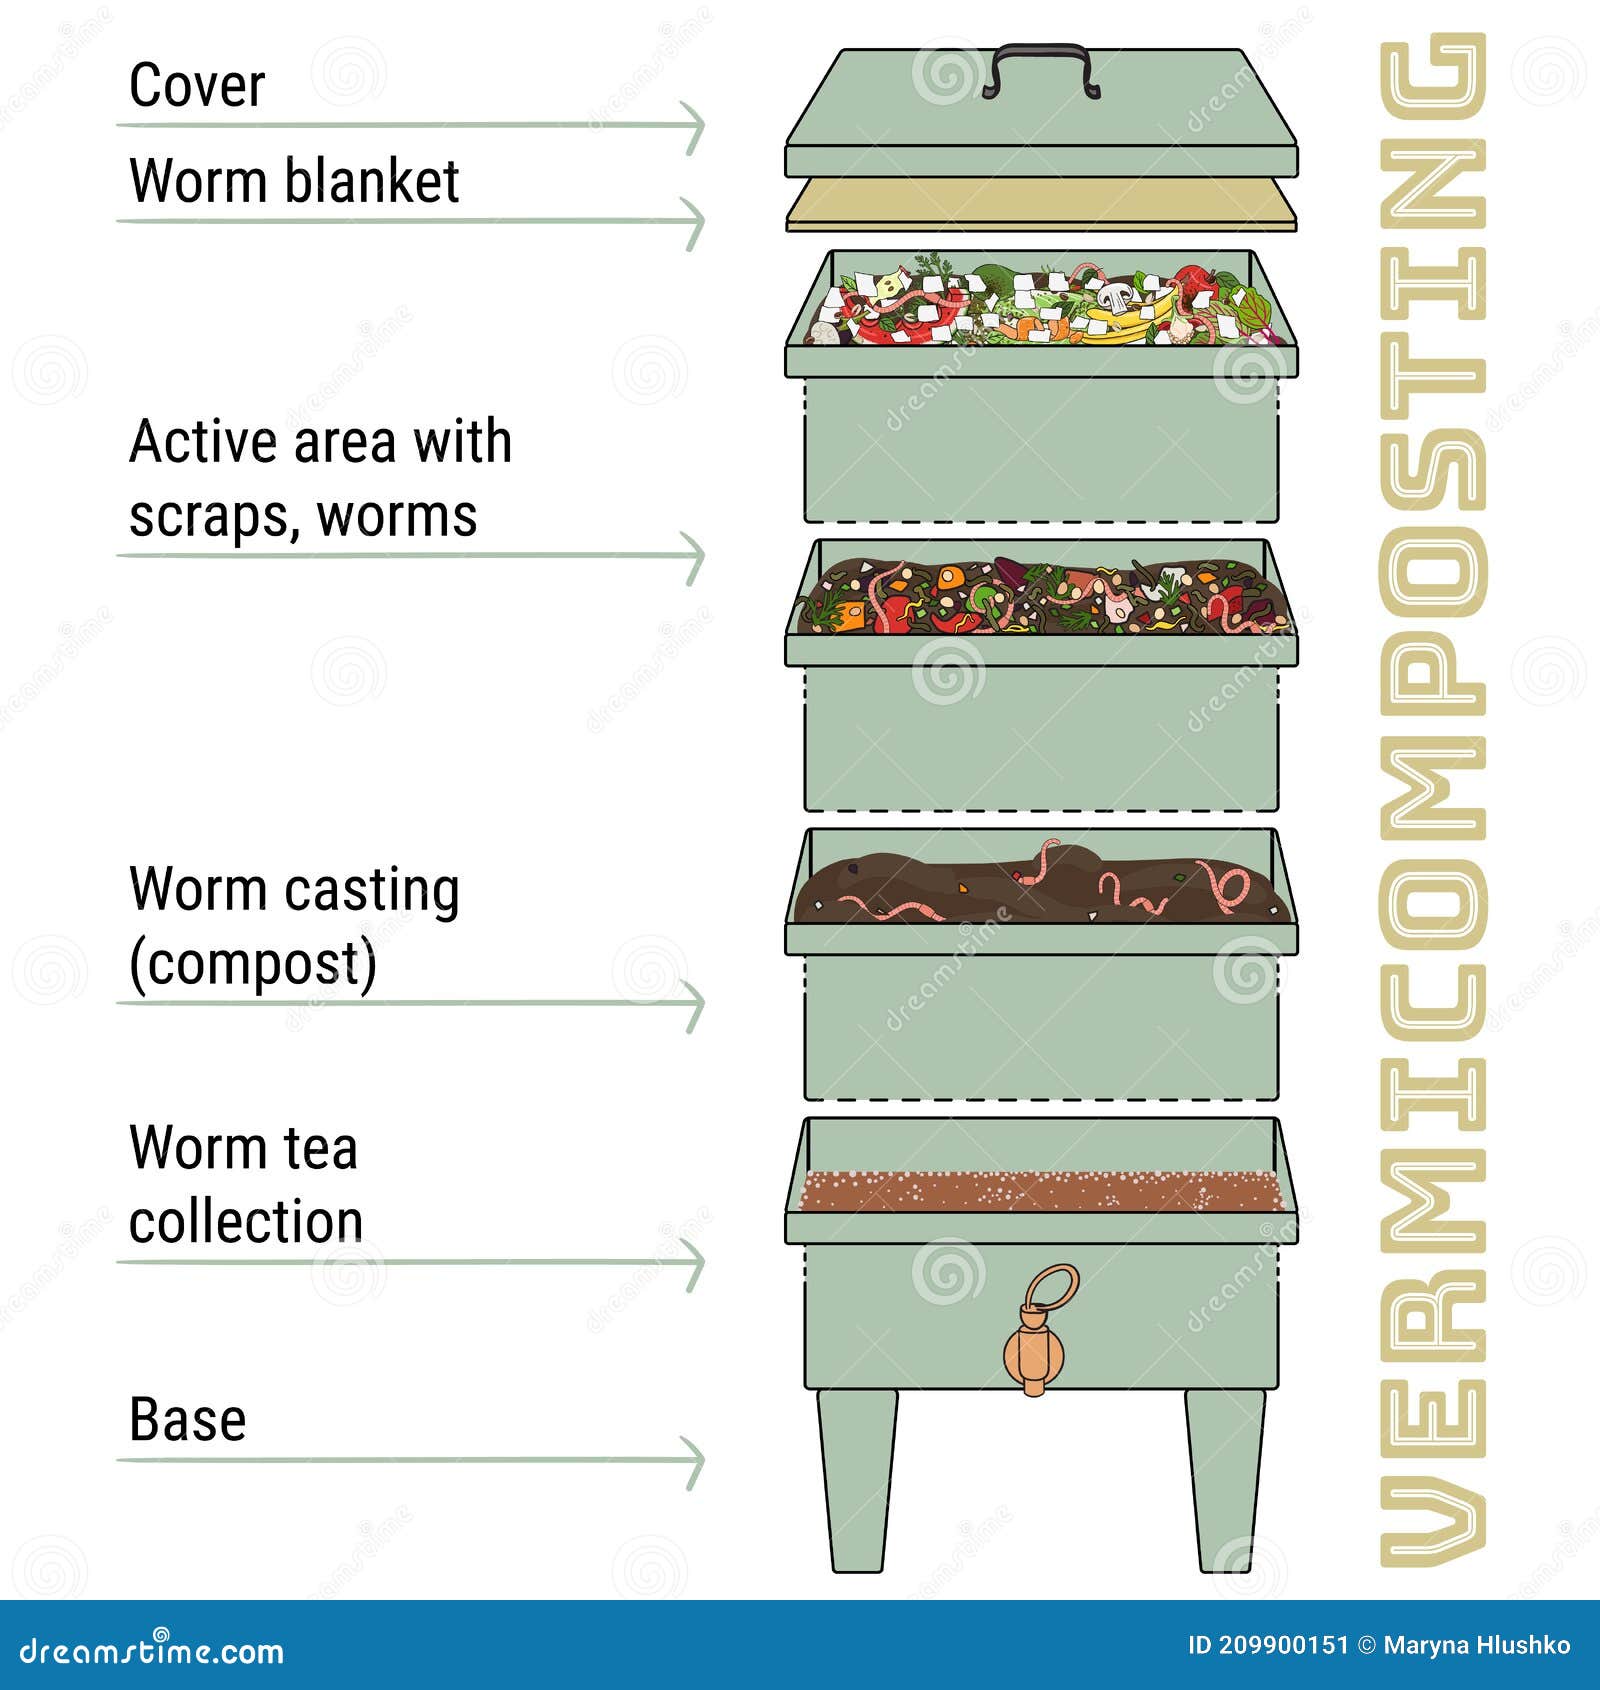 Infographic of Vermicomposting. Components of Vermicomposter